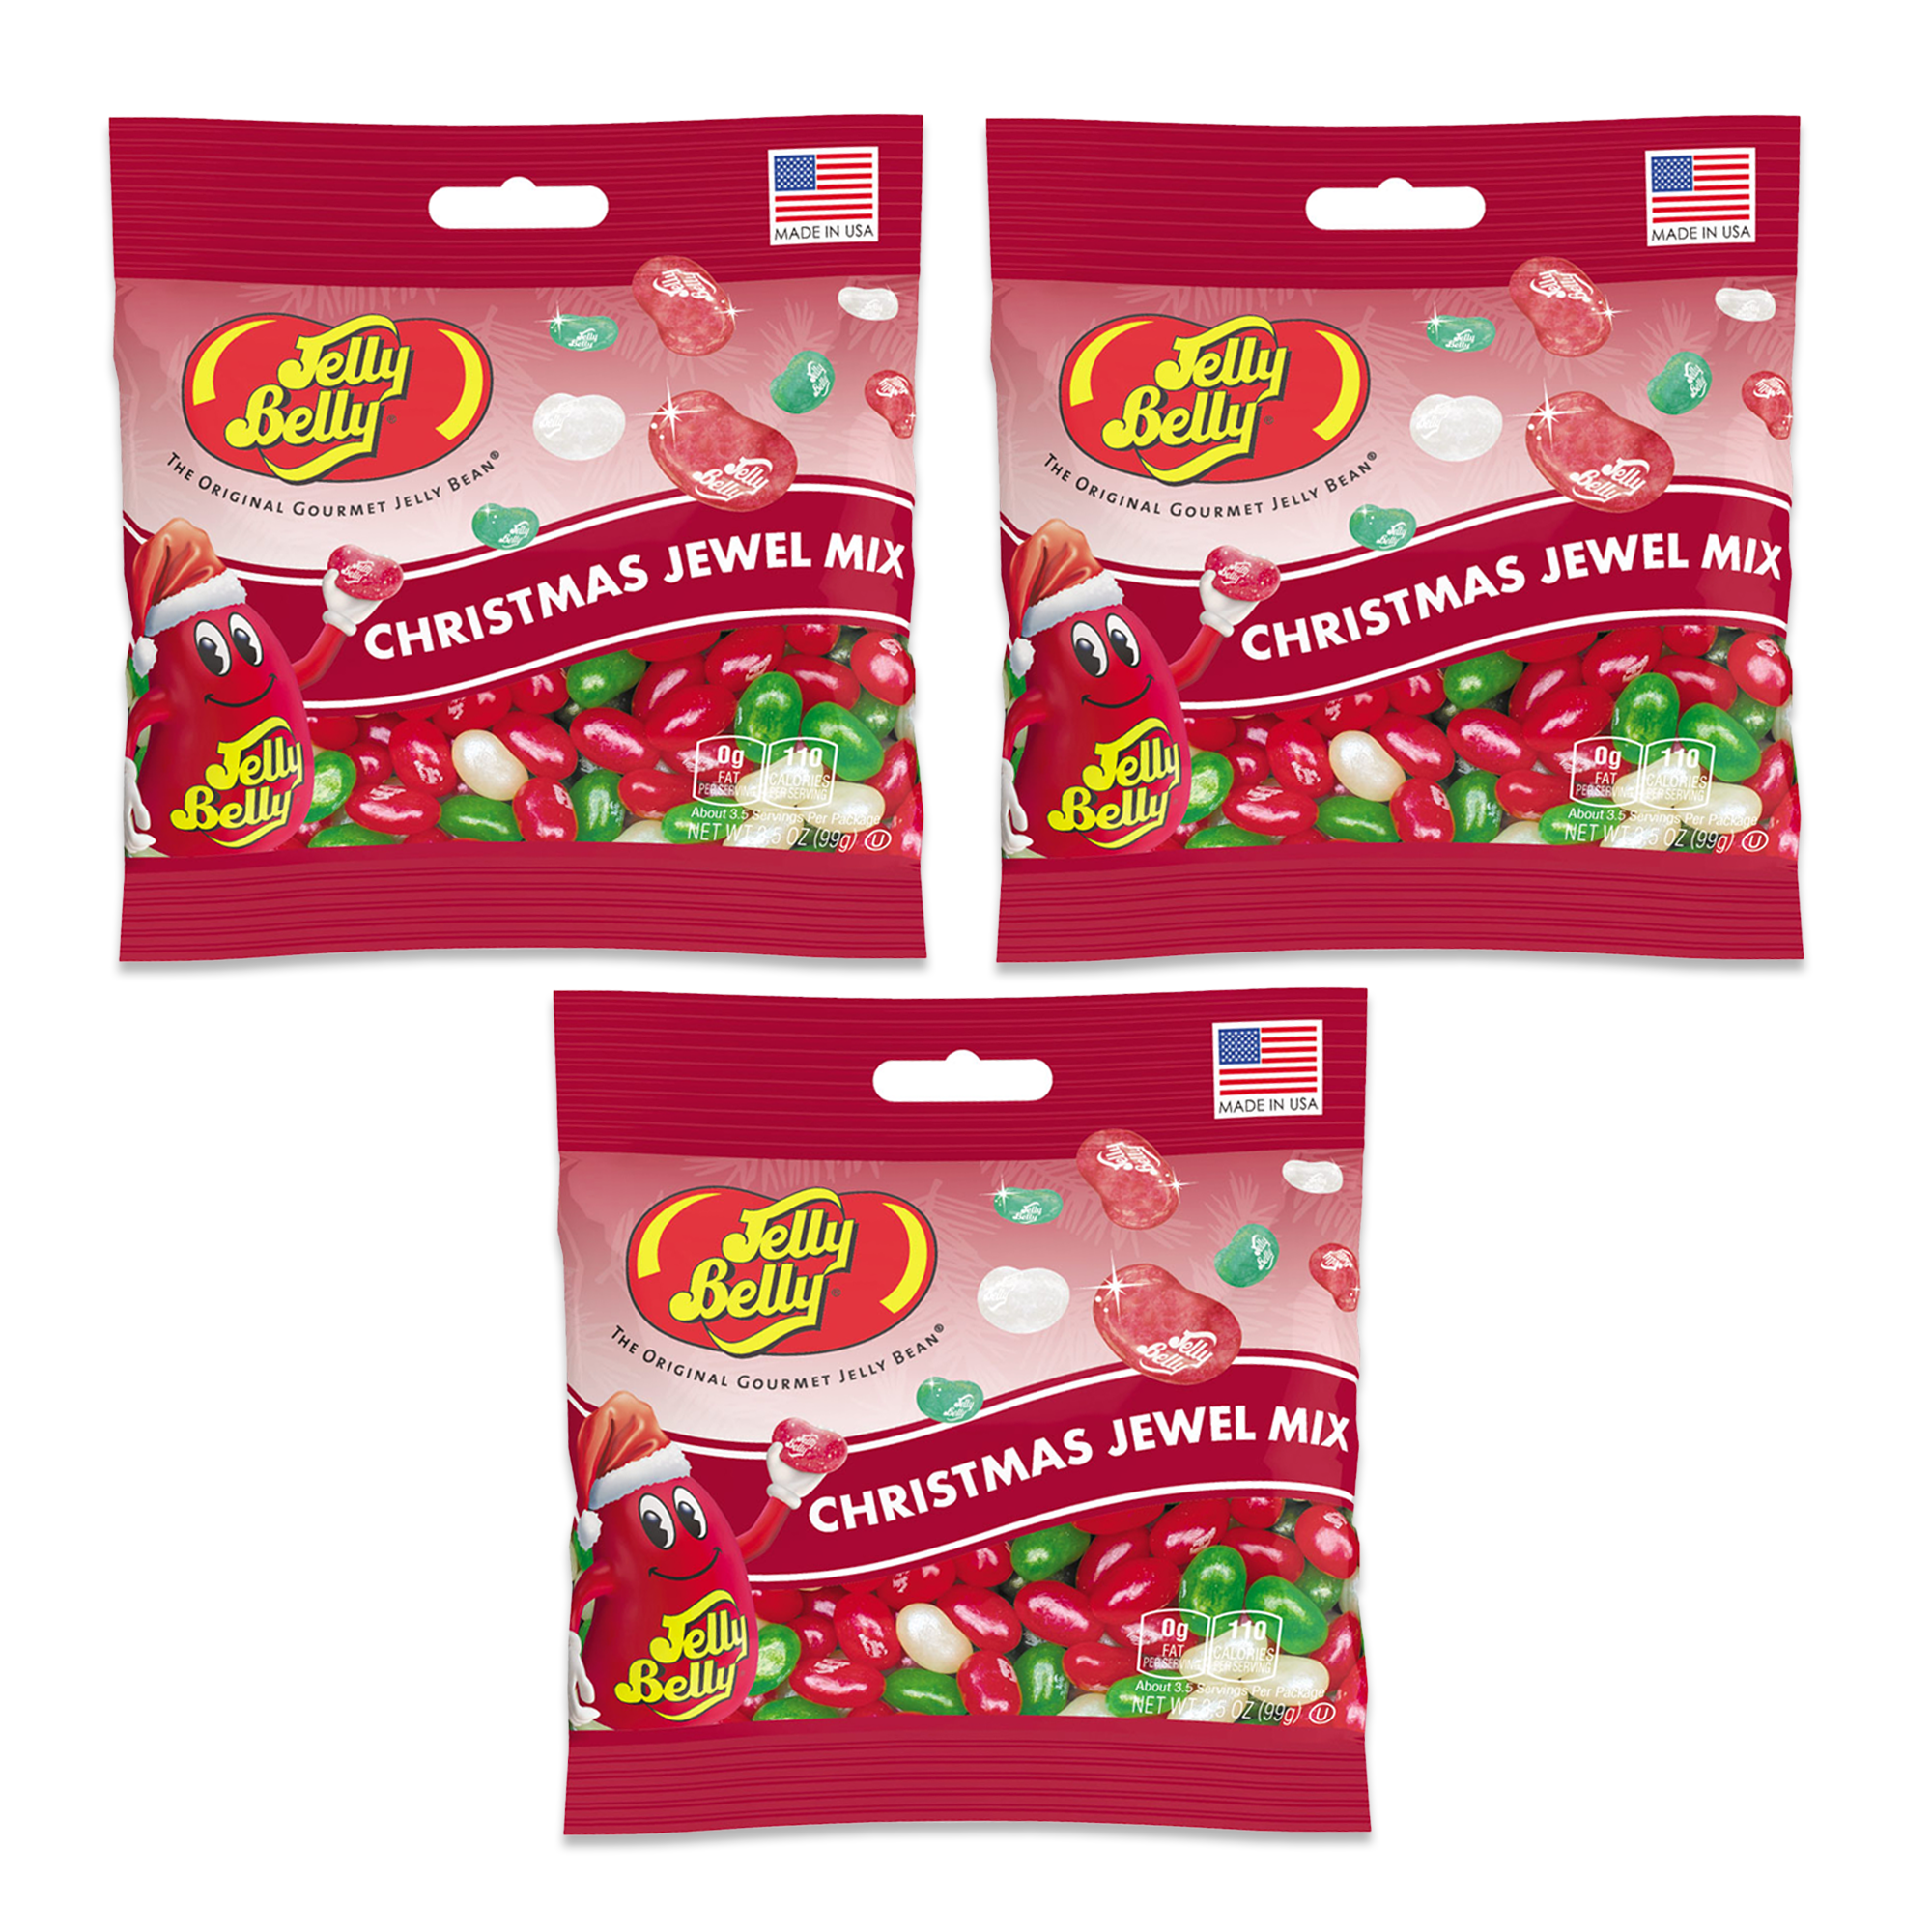  Santa's Silver Bells, Give Them A Jingle To Get Off The  Naughty List- Stocking Stuffer Candy. 5.5oz Bag of Jelly Disks by Inspired  Candy. Unique Stocking Stuffers For Adults or